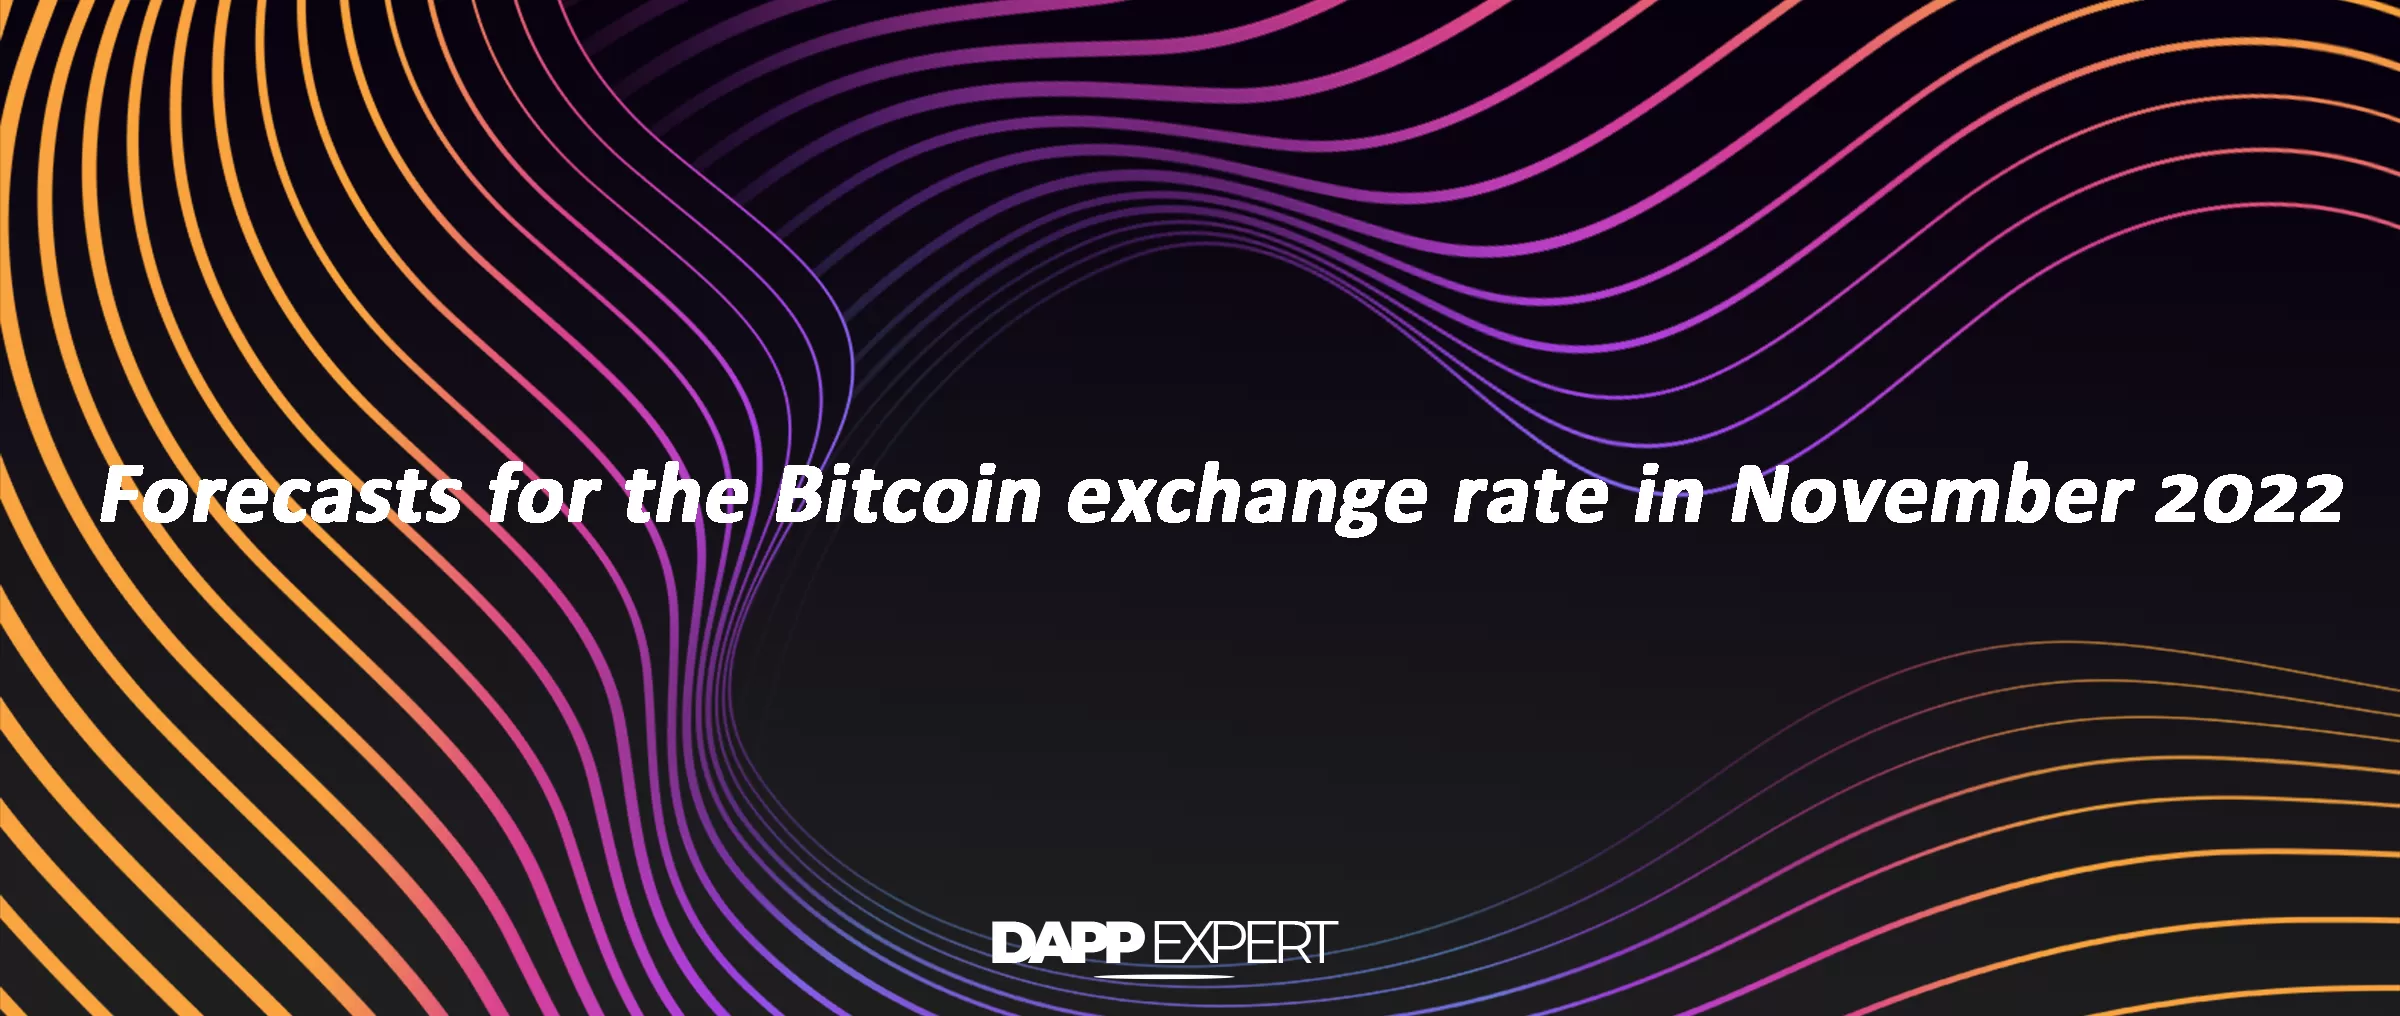 Forecasts for the Bitcoin exchange rate in November 2022